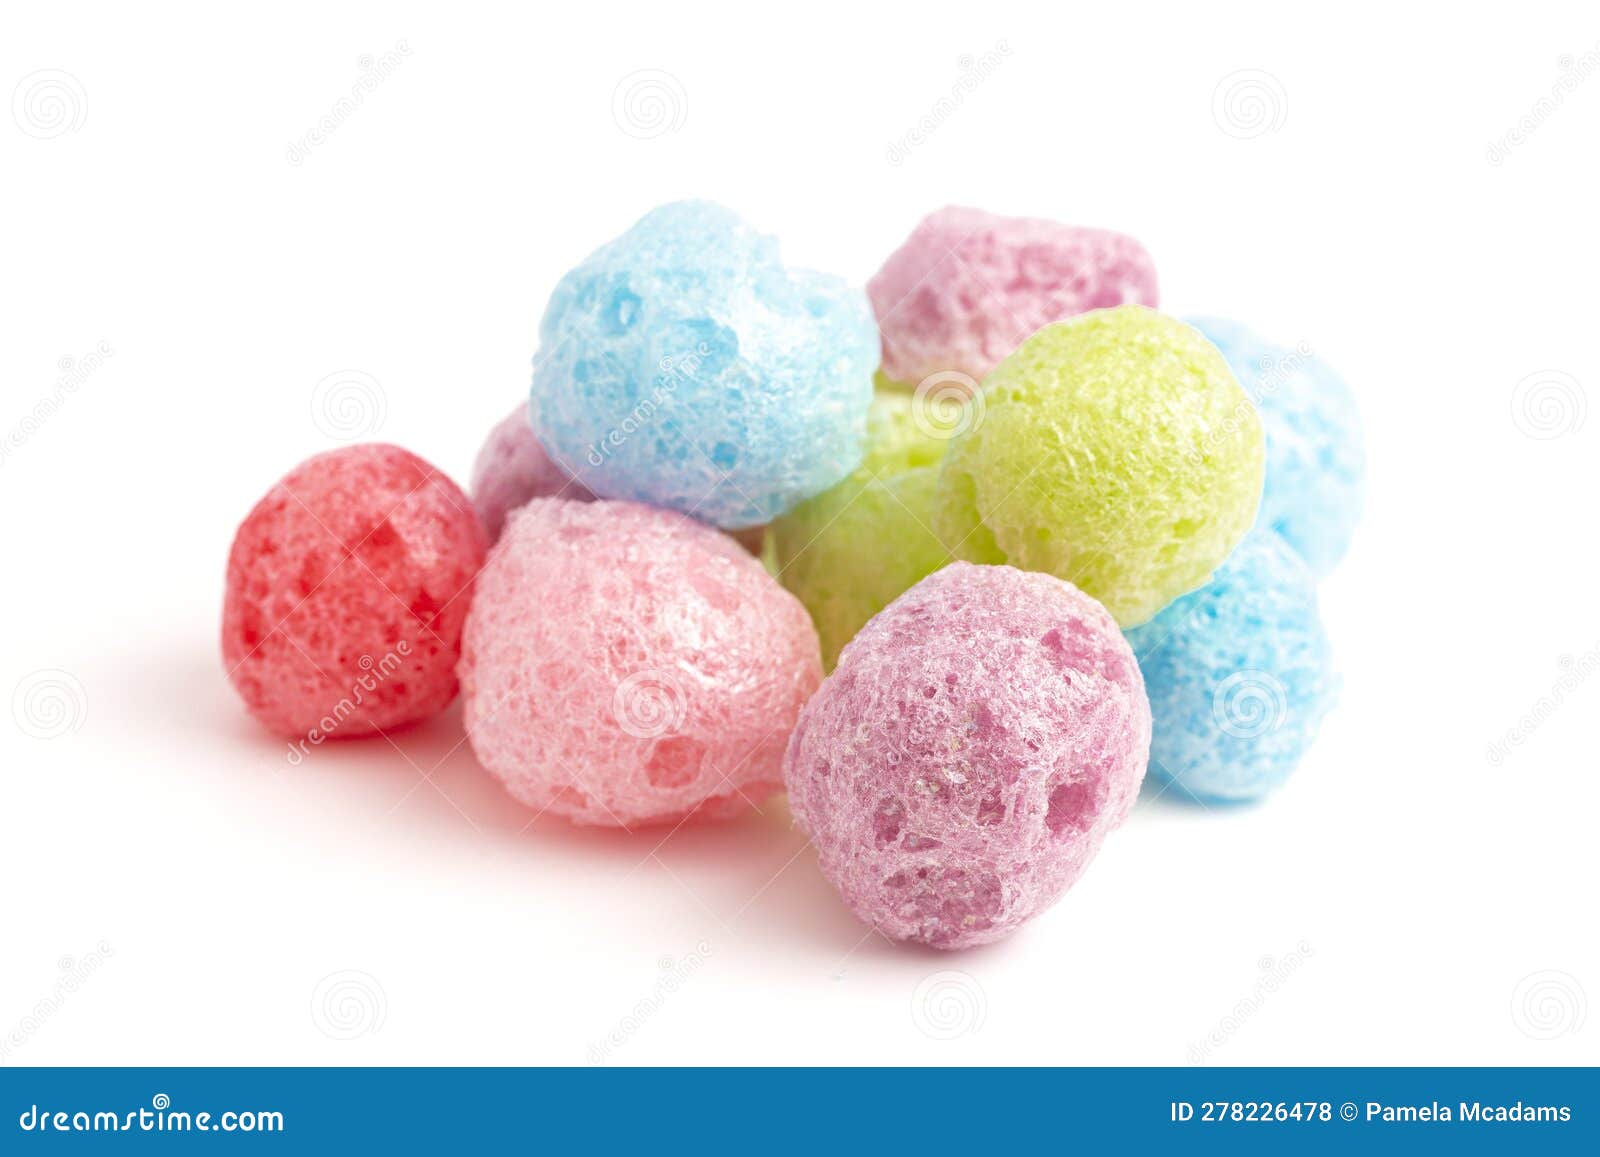 freeze dried fruit flavored candy  on a white background